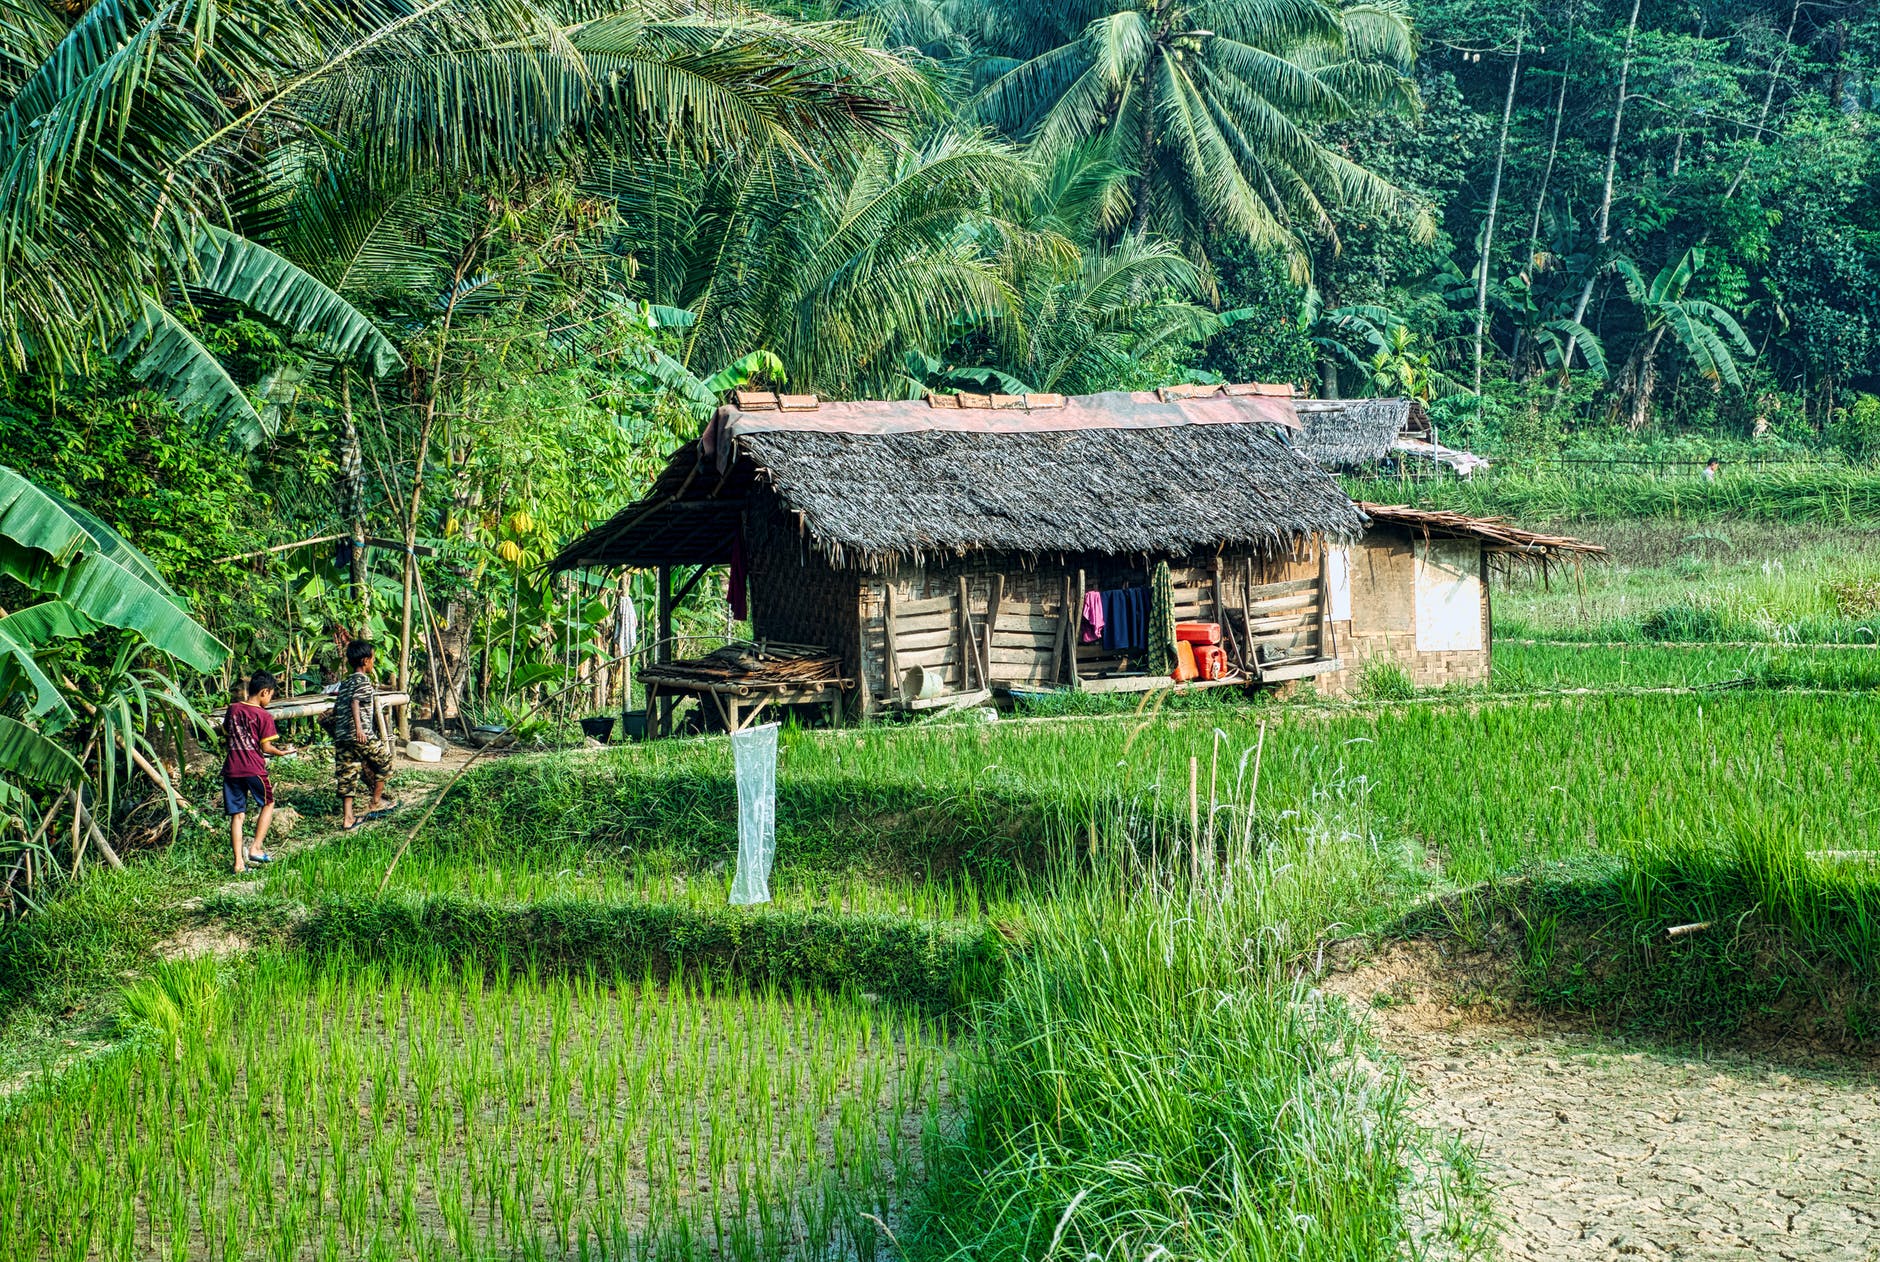 two people walking towards a nipa hut in the rice fields surrounded by thick vegetation